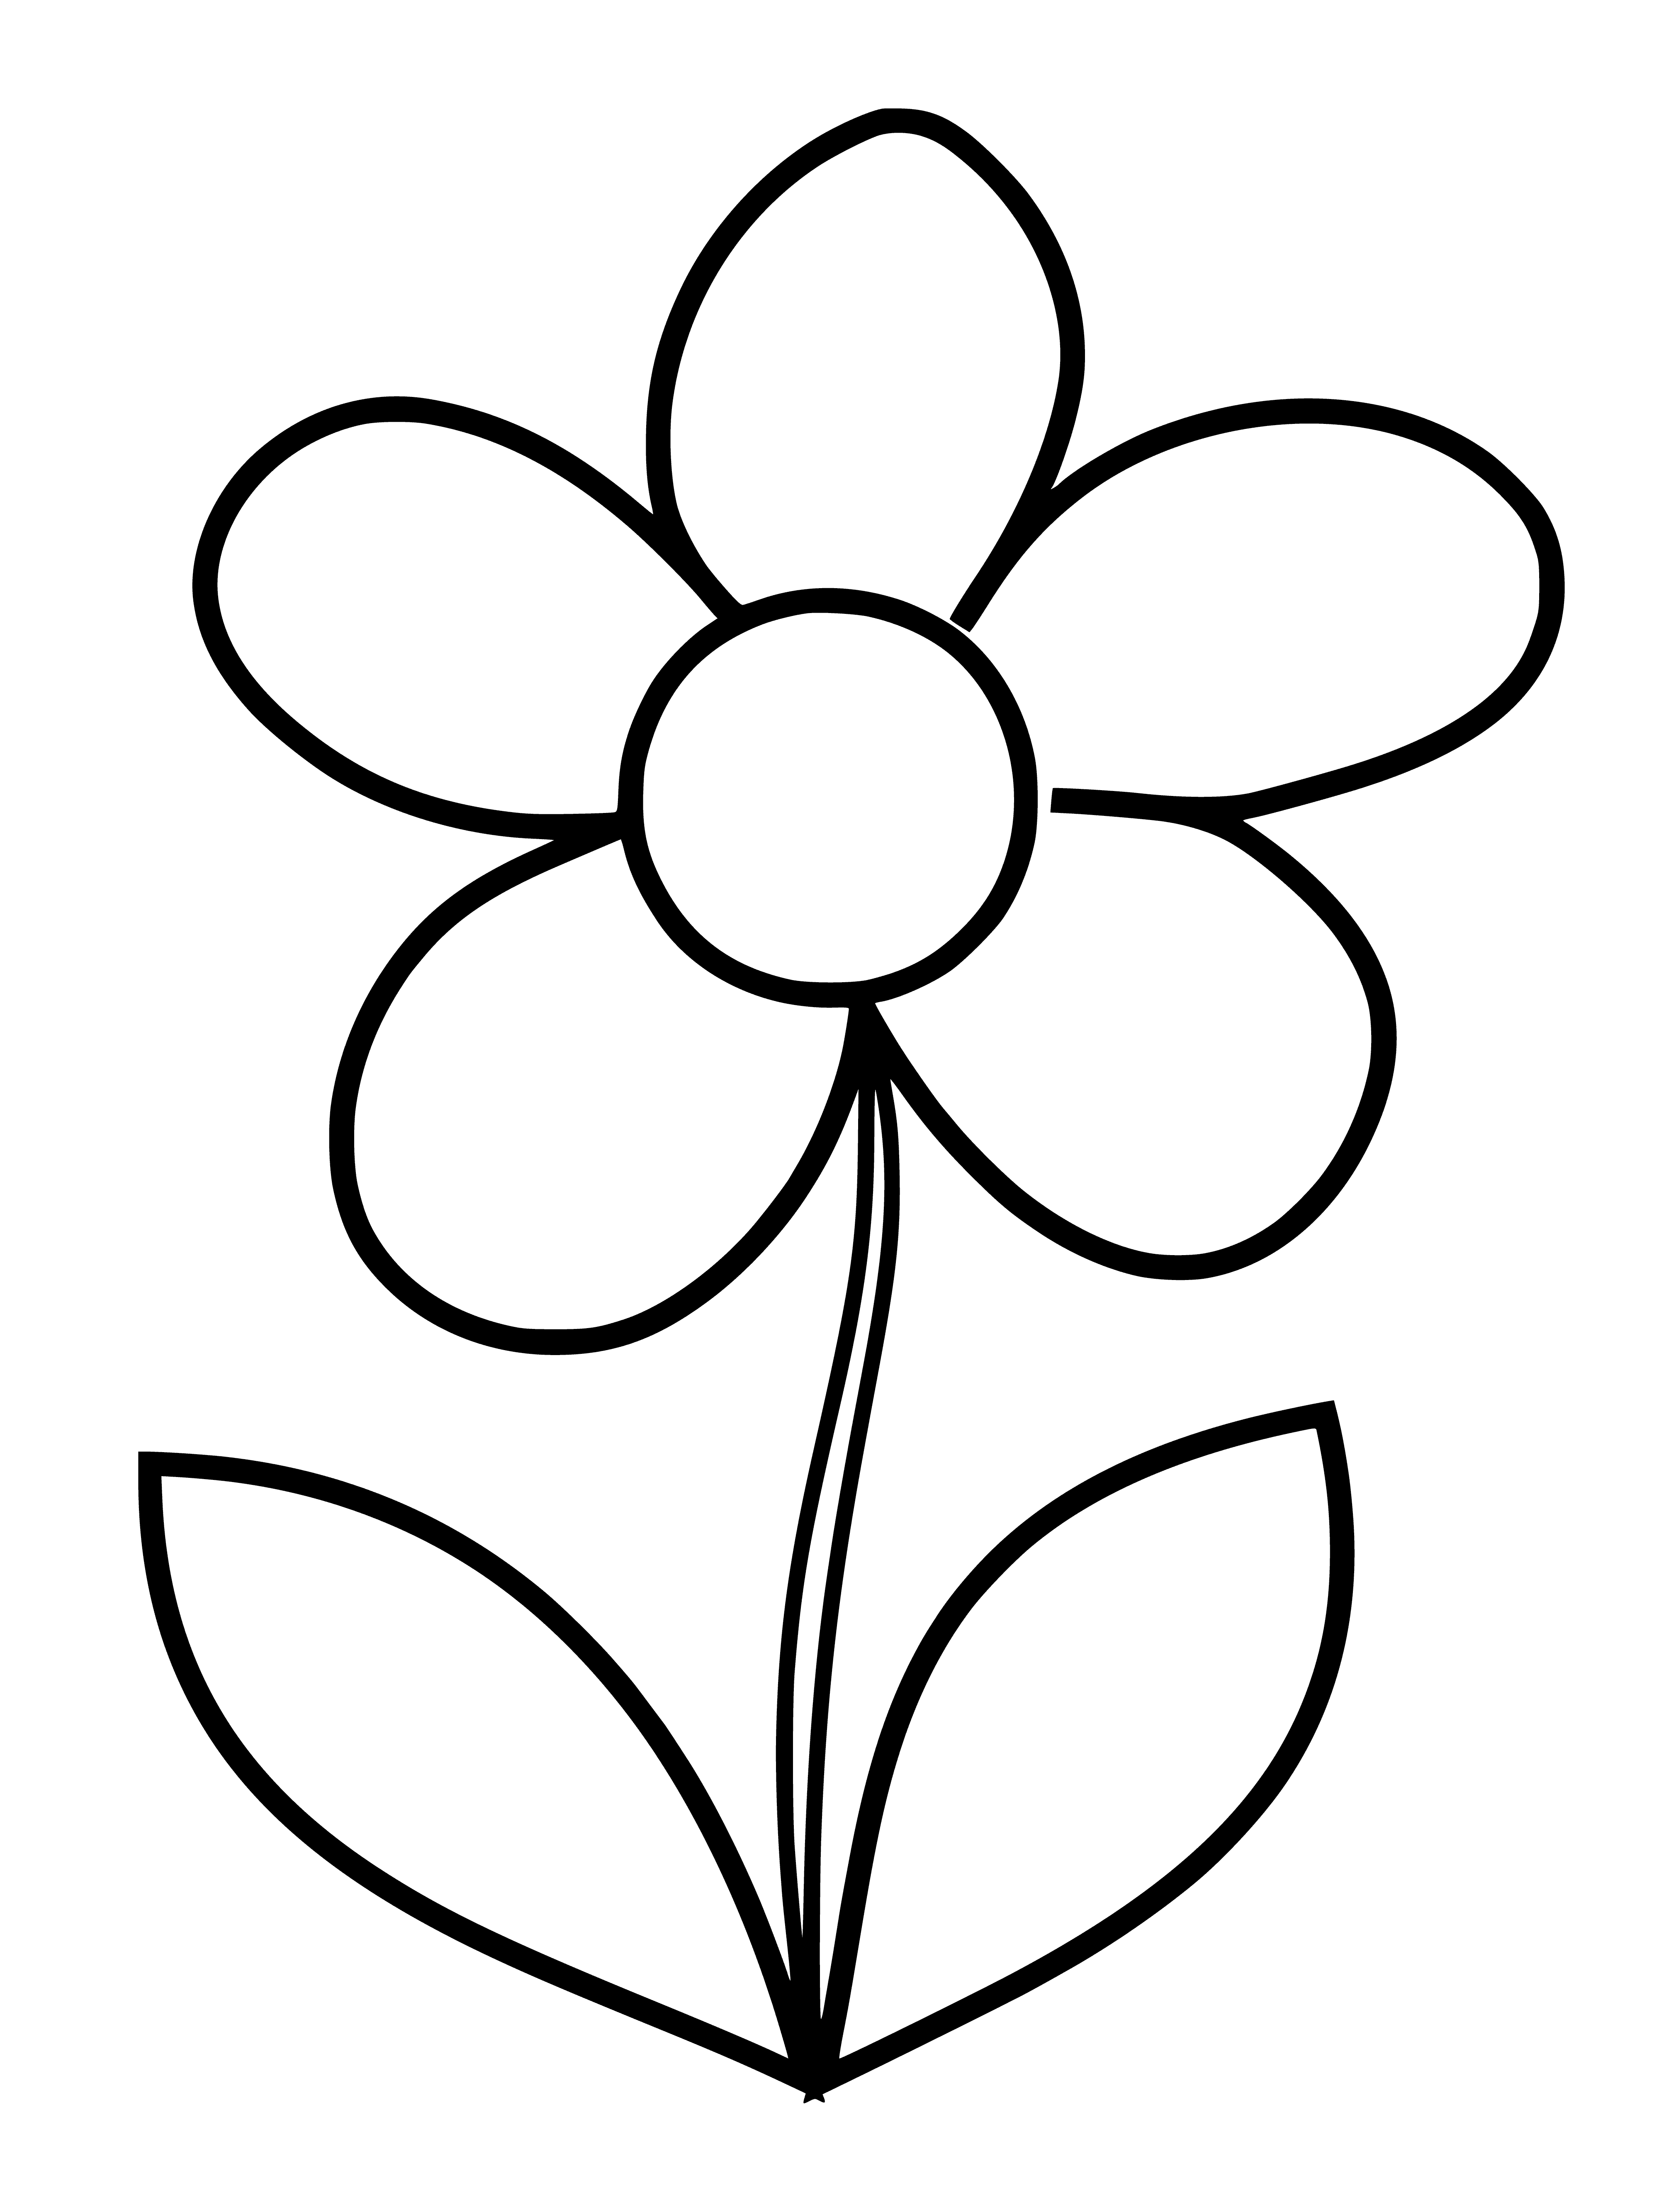 coloring page: A close-up of a flower with yellow center, red/orange petals, & green leaves. #flower #nature